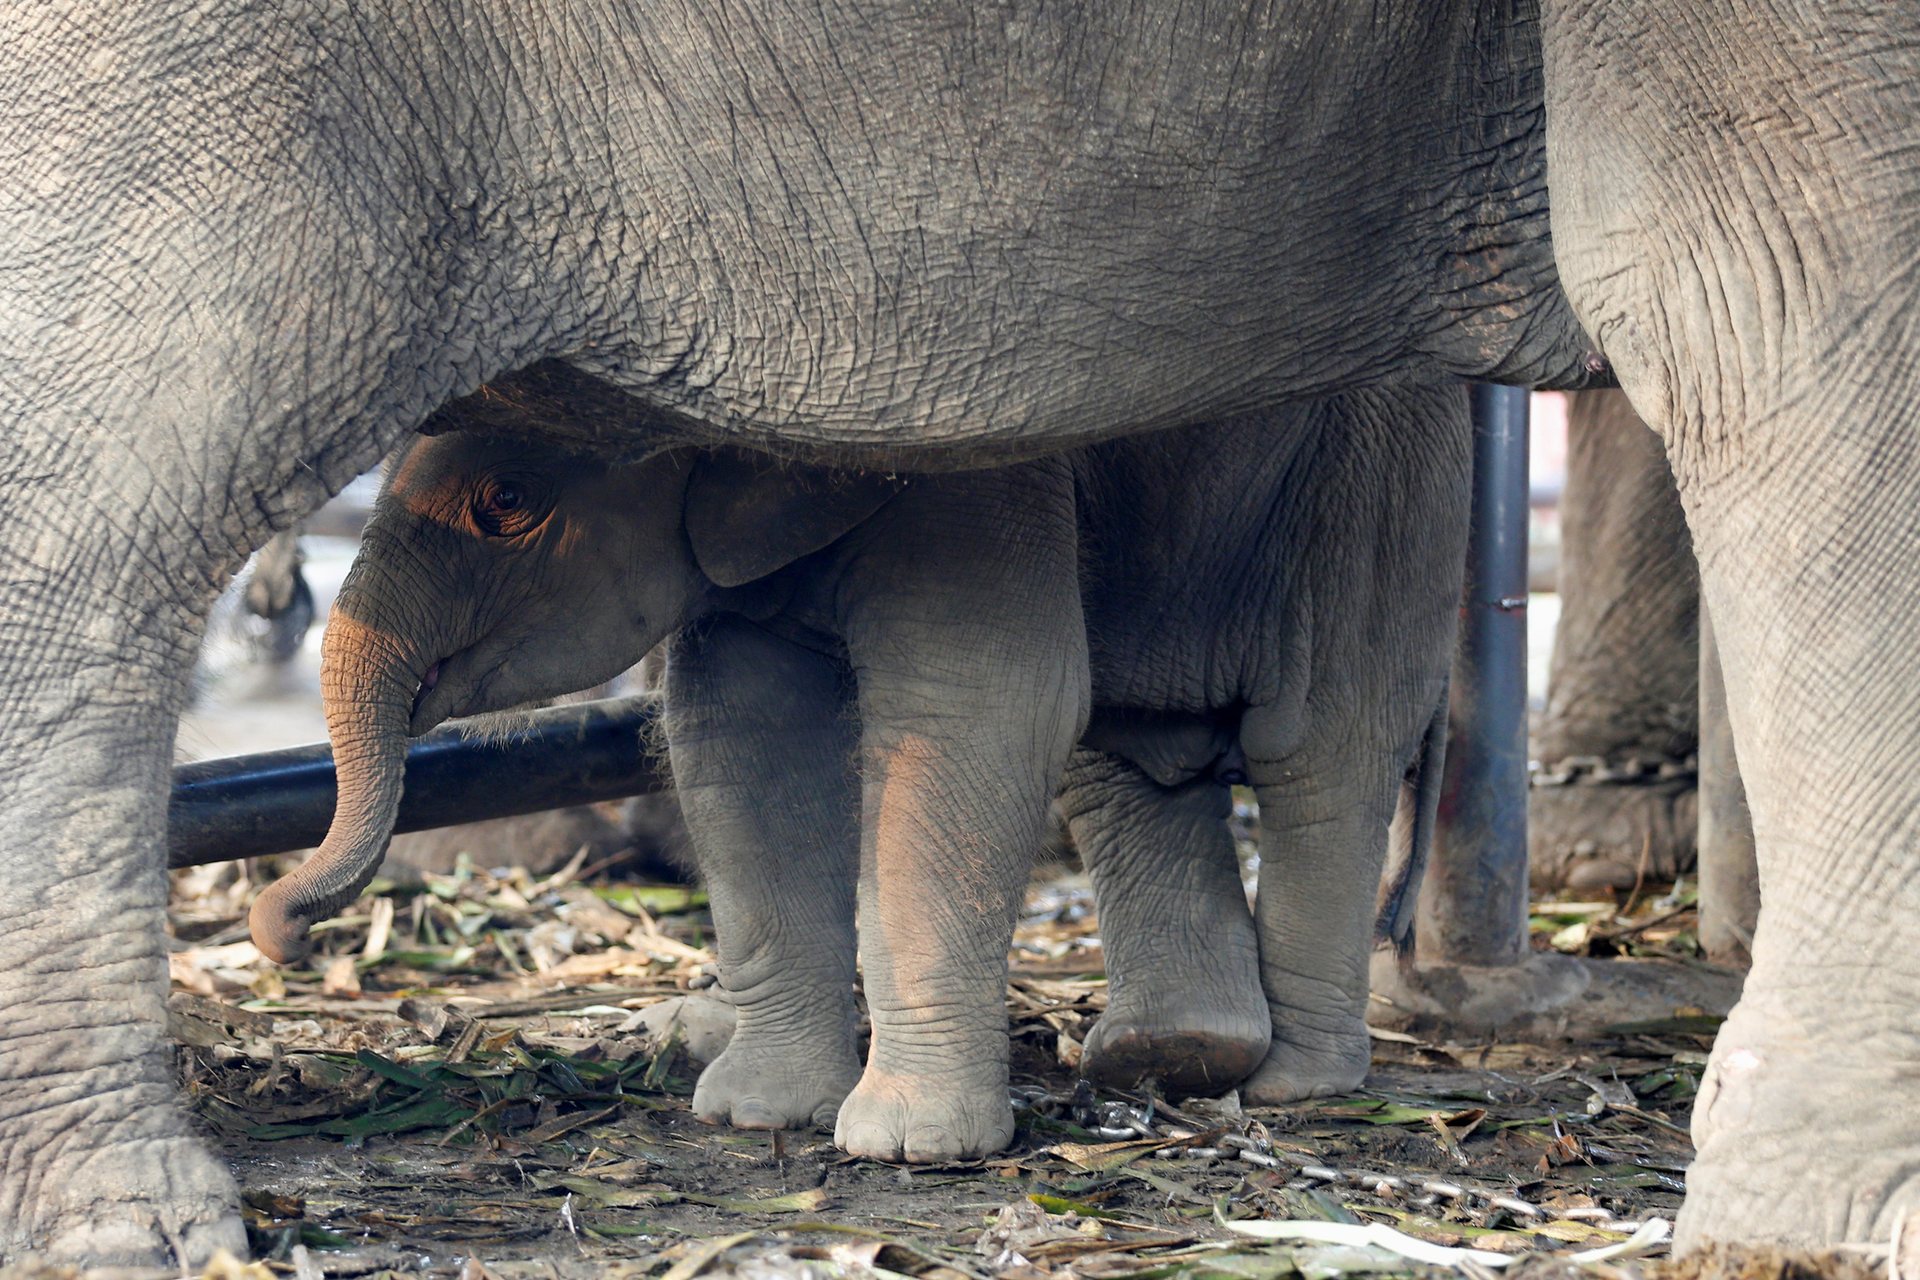 A baby elephant stands under its mother on Thailandâs national elephant day, Ayutthaya, Thailand. PHOTO: REUTERS